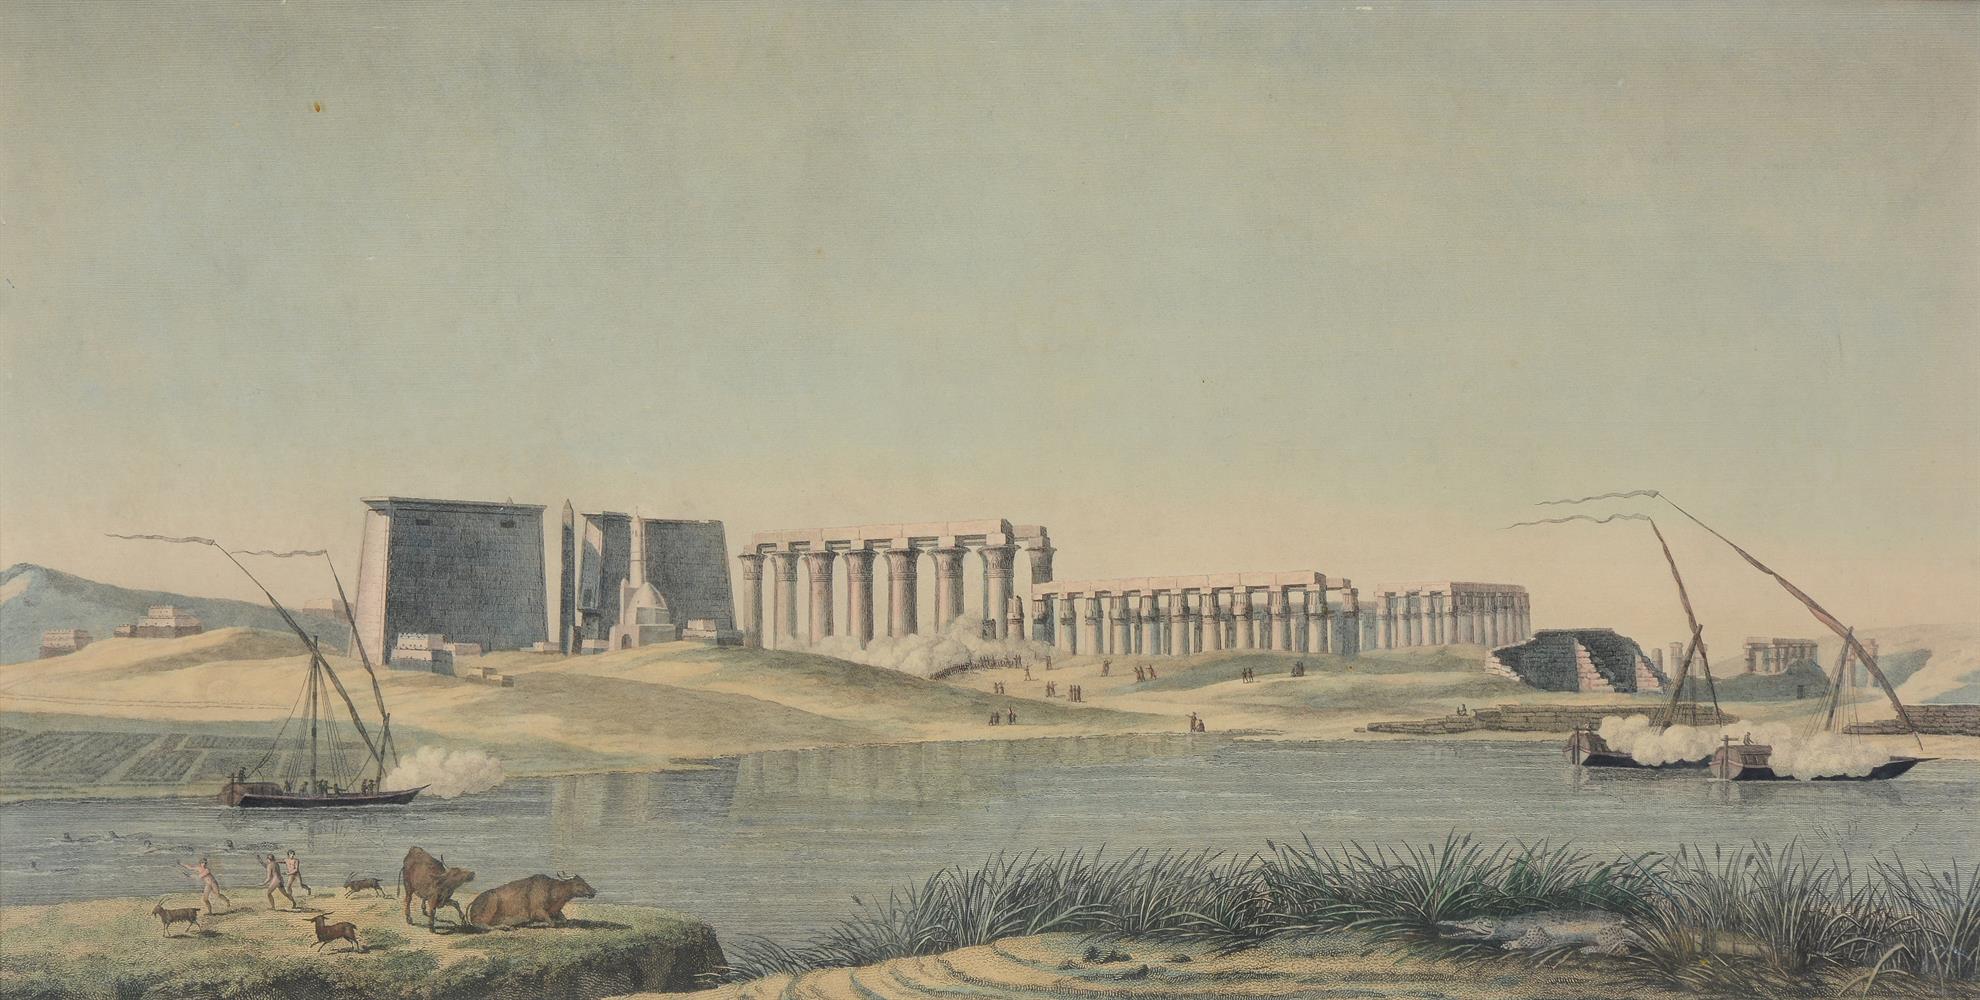 SIX HAND-COLOURED ENGRAVINGS OF EGYPT (LUXOR, KARNAK, DENDERA), EARLY 19TH CENTURY - Image 10 of 13